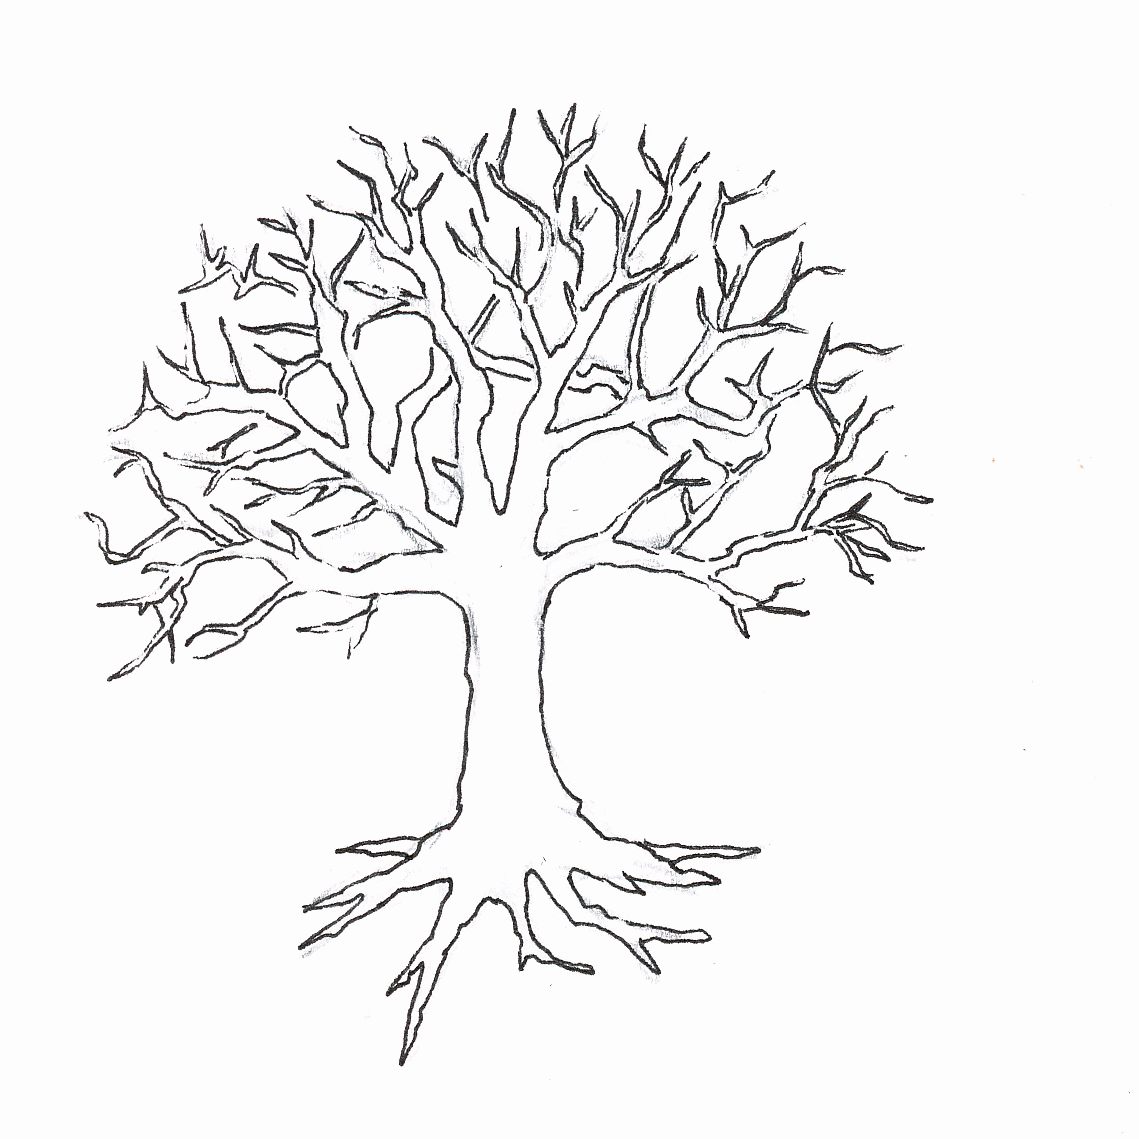 Download Coloring Page Of A Tree Without Leaves - Coloring - Coloring Home